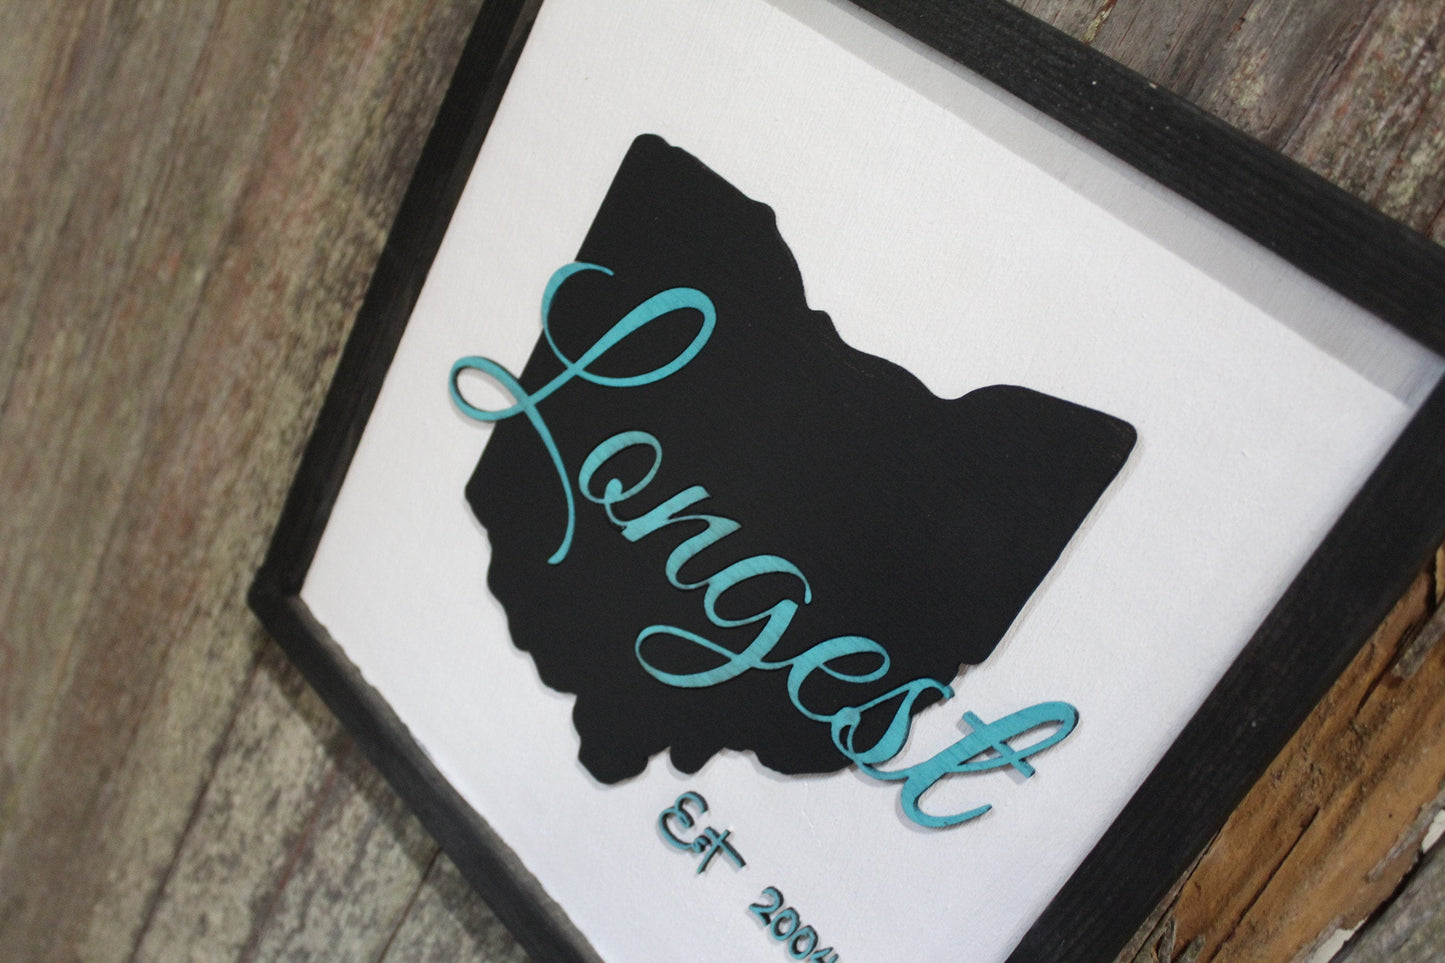 Custom State and Last Name Personalization Established Wood Sign 3D Raised Text Personalize Wedding New Home Gift Black Teal Travel Home